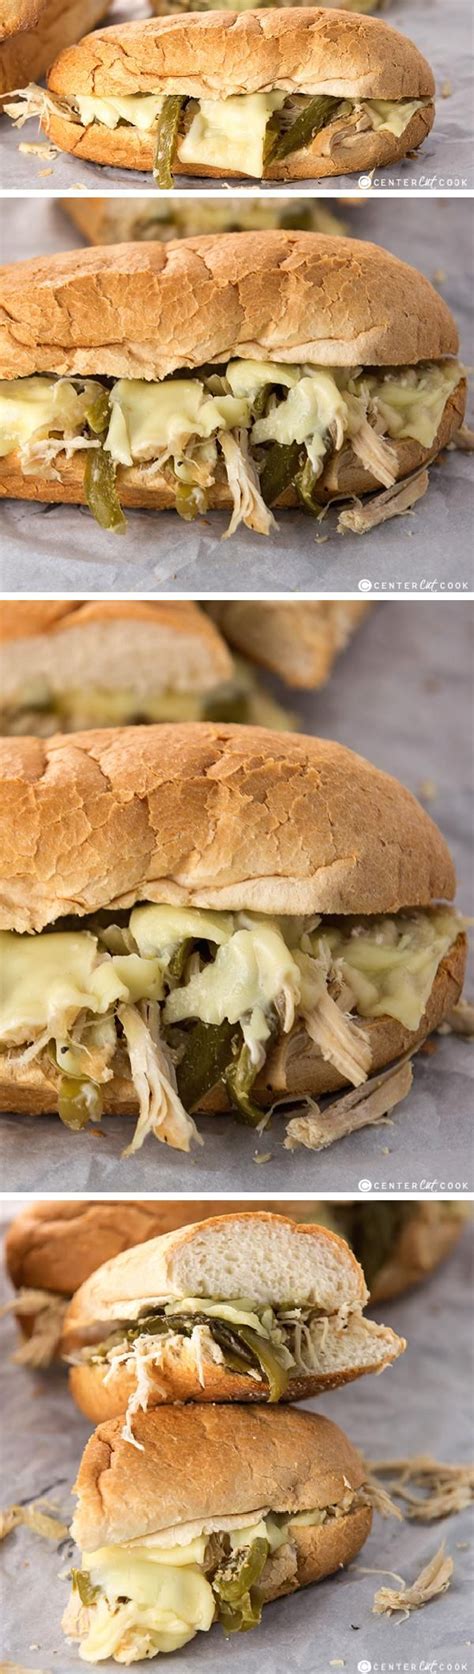 Slow Cooker Chicken Philly Sandwiches Recipe Slow Cooker Chicken